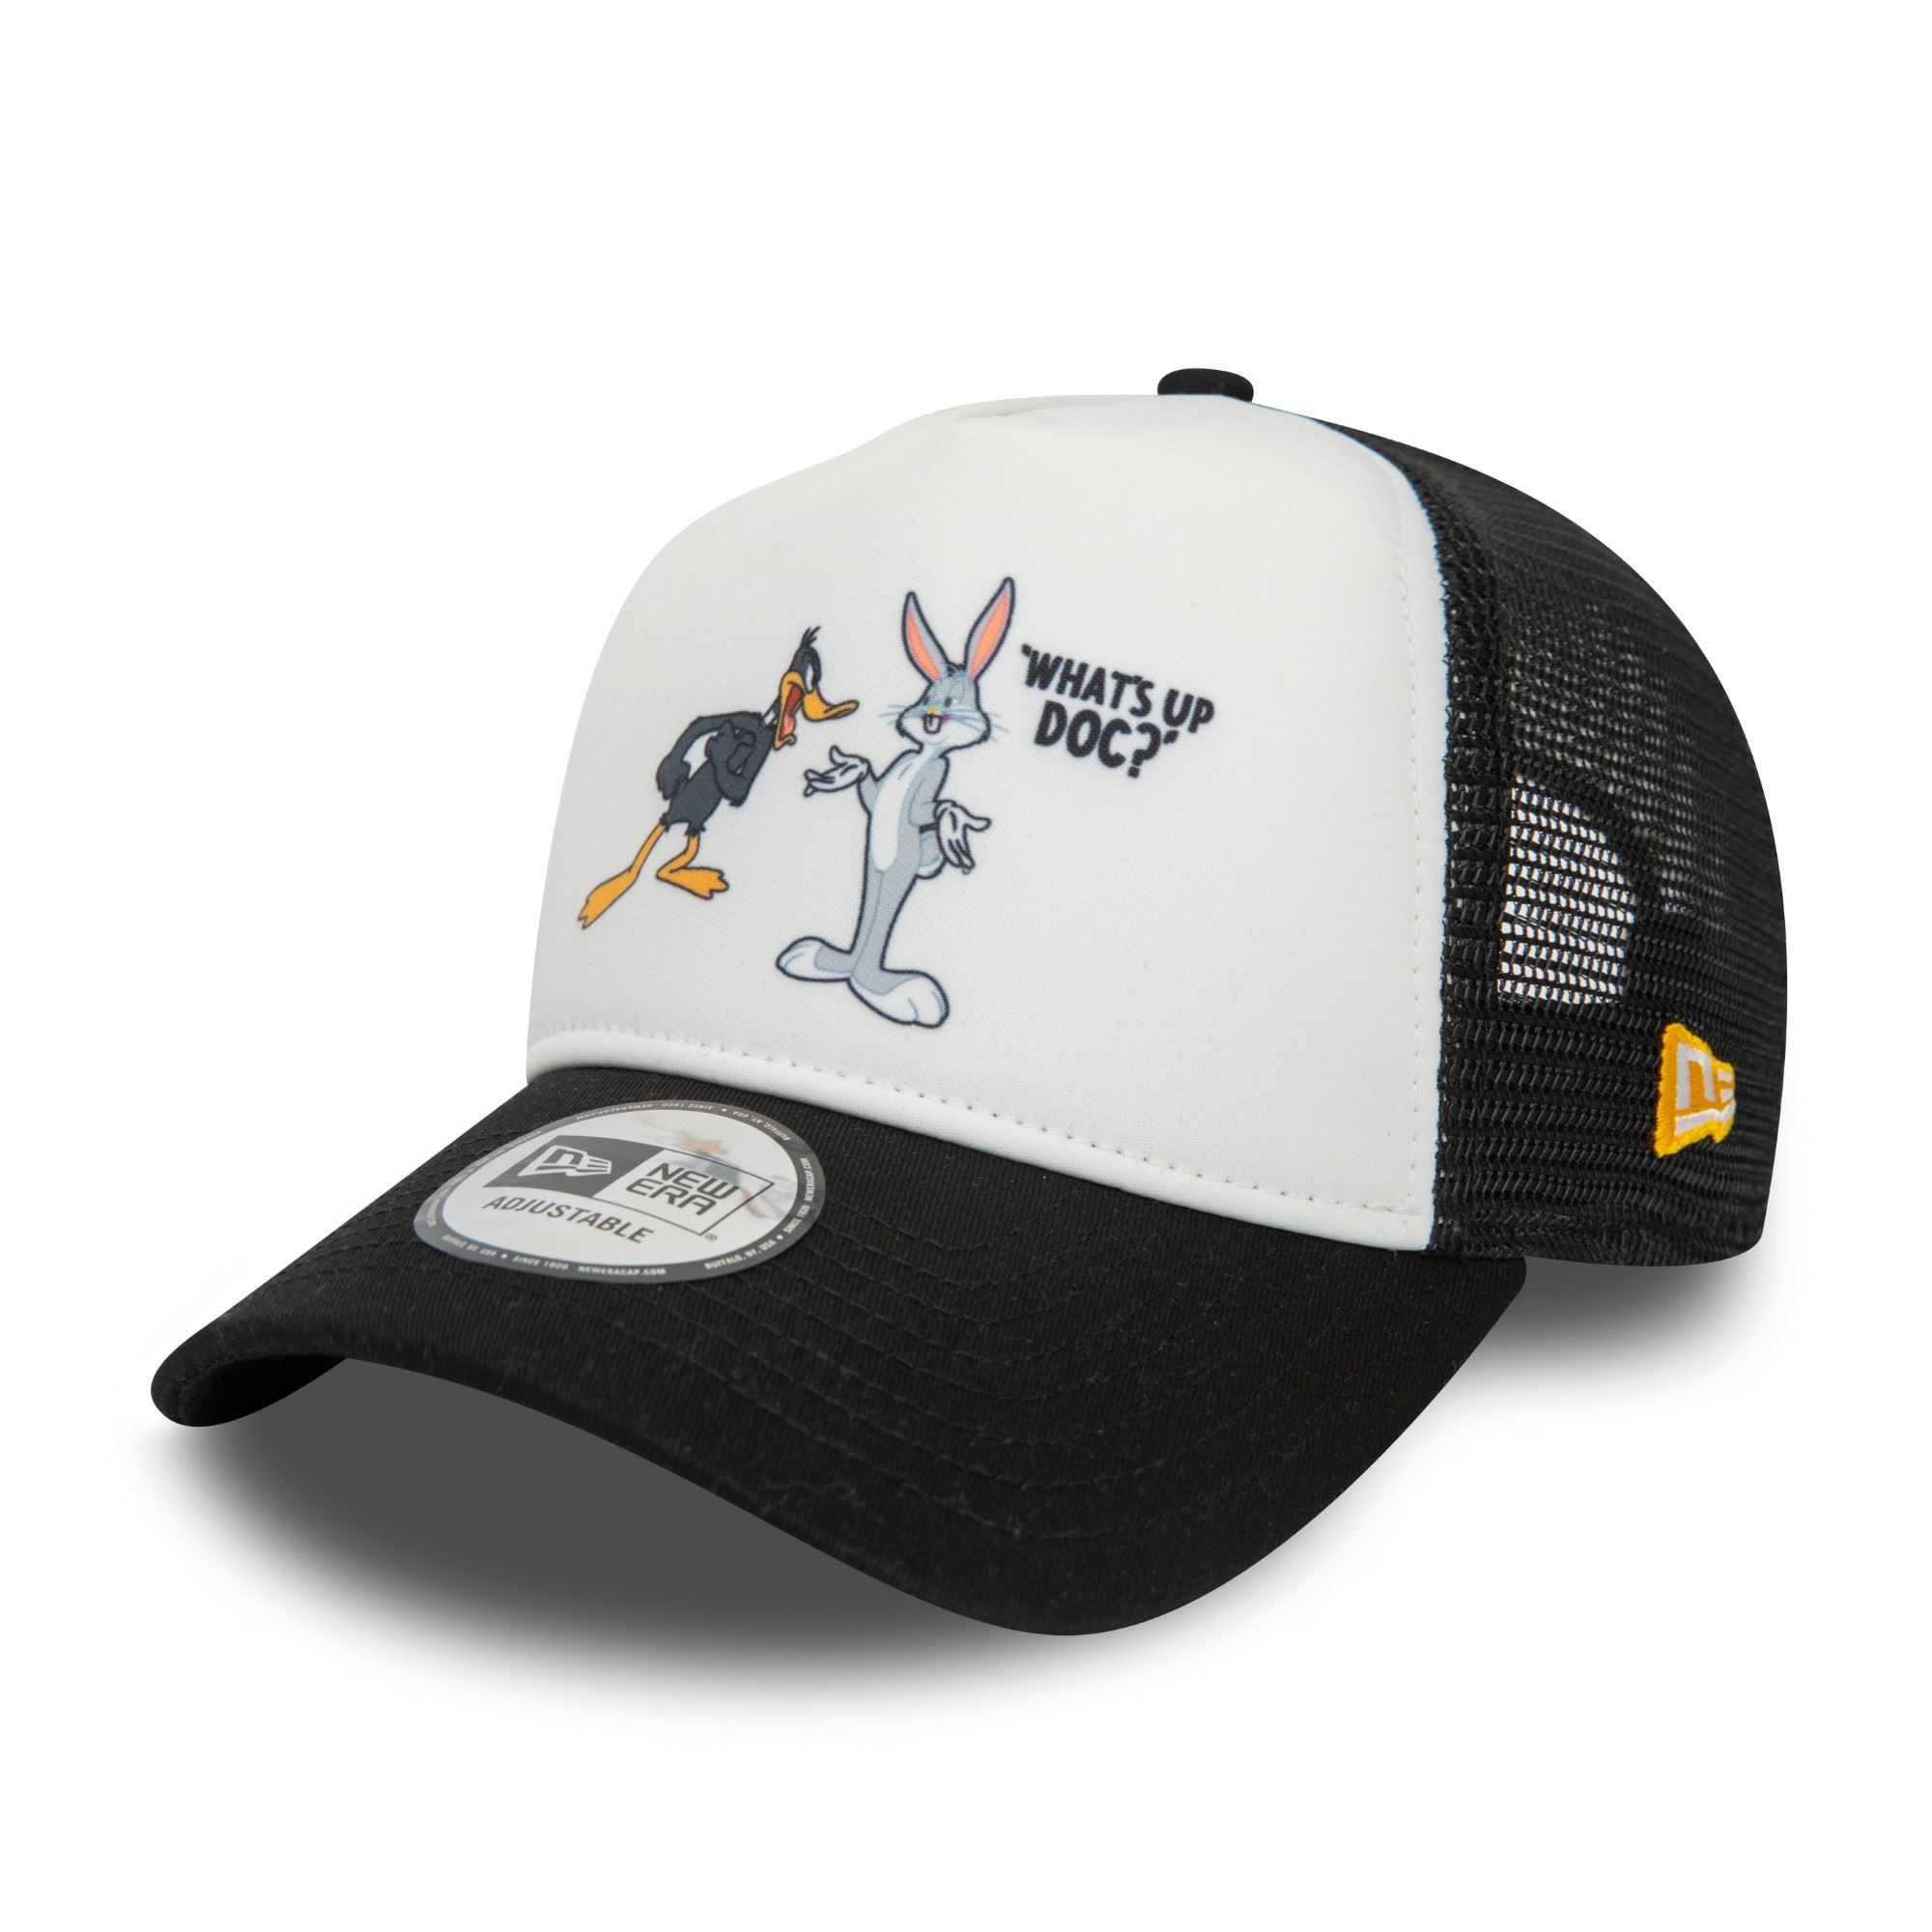 Bugs Bunny and Daffy Duck Looney Tunes Character Black White A-Frame Adjustable Trucker Cap New Era